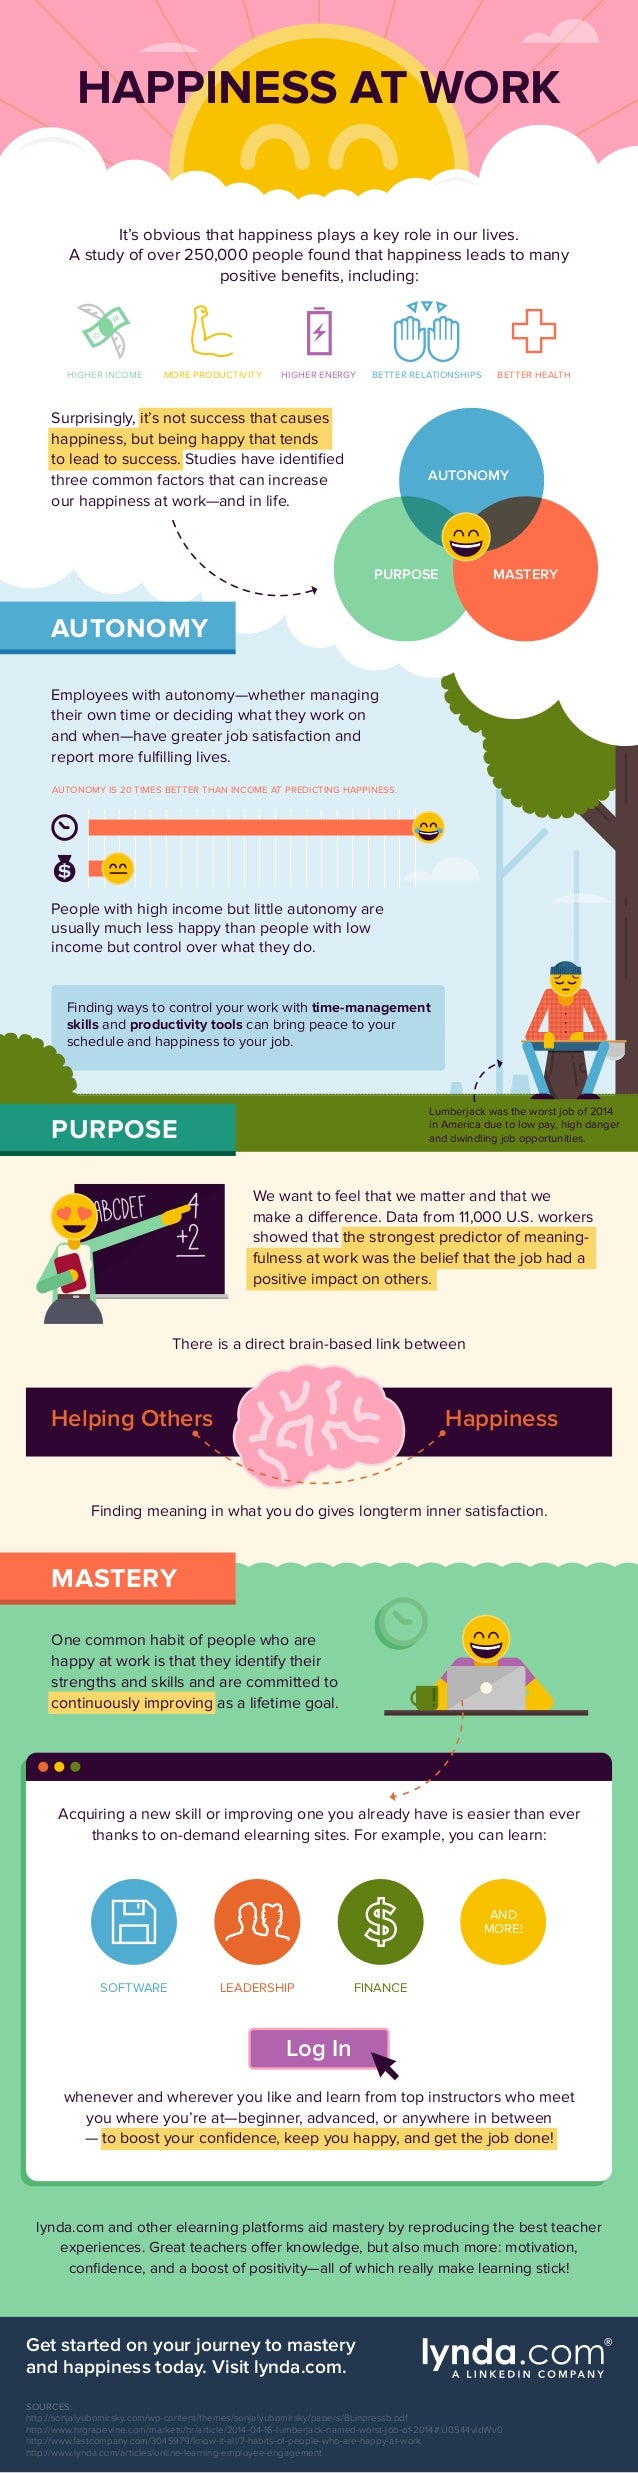 HAPPINESS AT WORK
It’s obvious that happiness plays a key role in our lives.
A study of over 250,000 people found that hap...